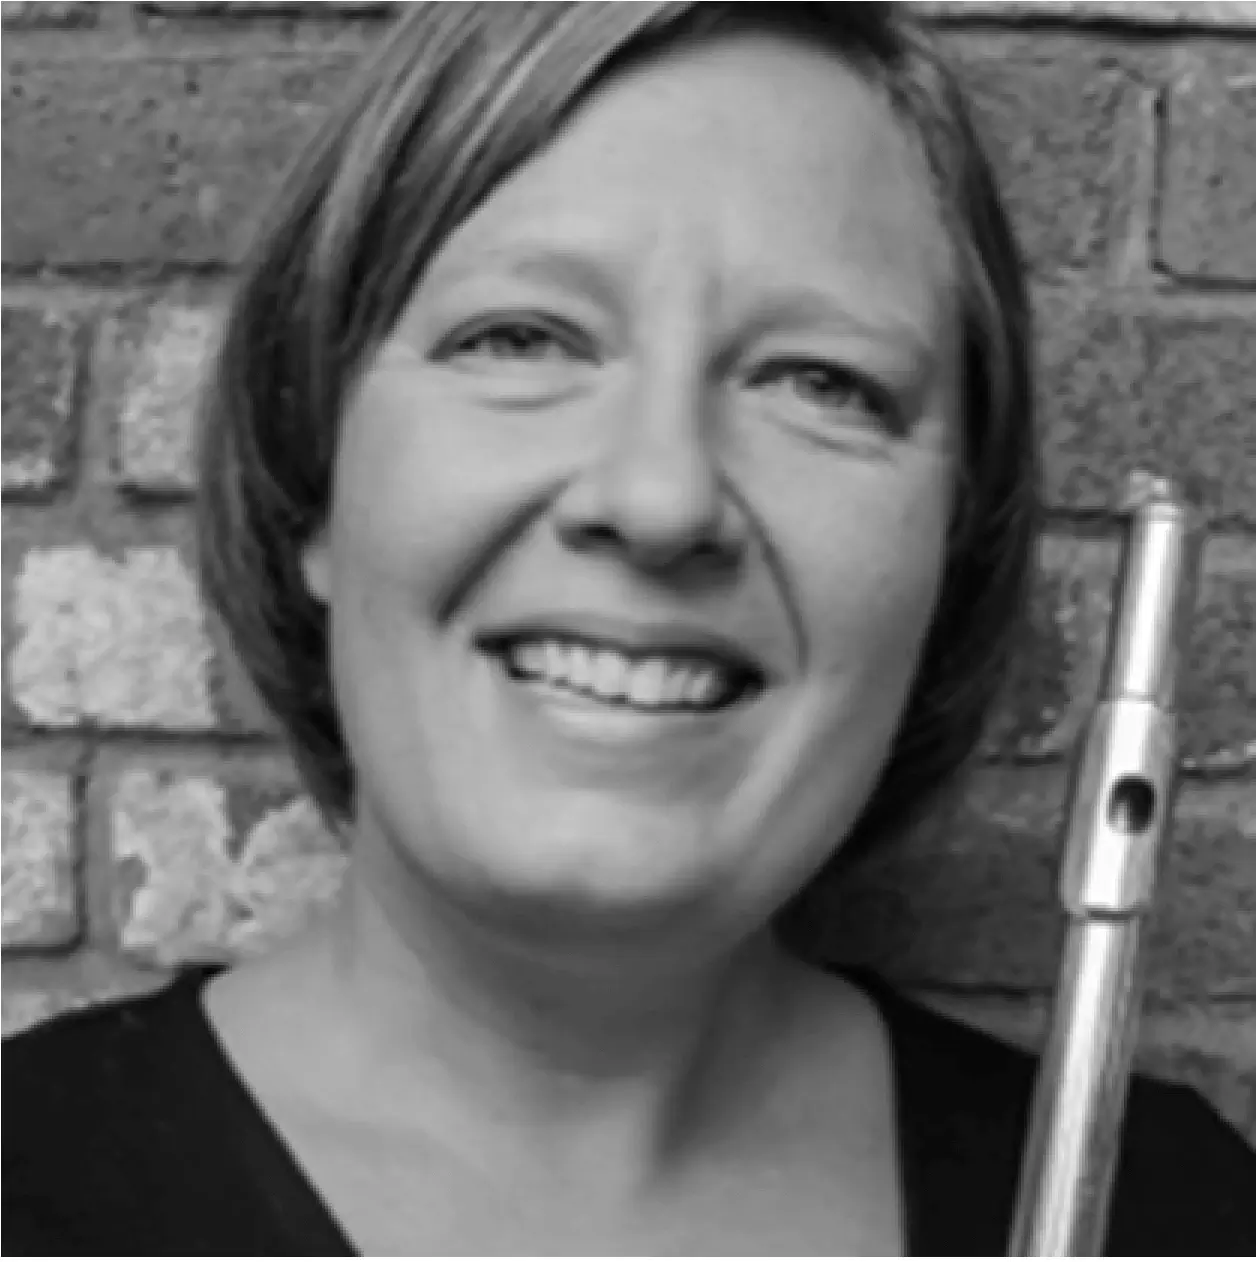 Kristen Young, APYO Winds Conductor and Charter School Band Director